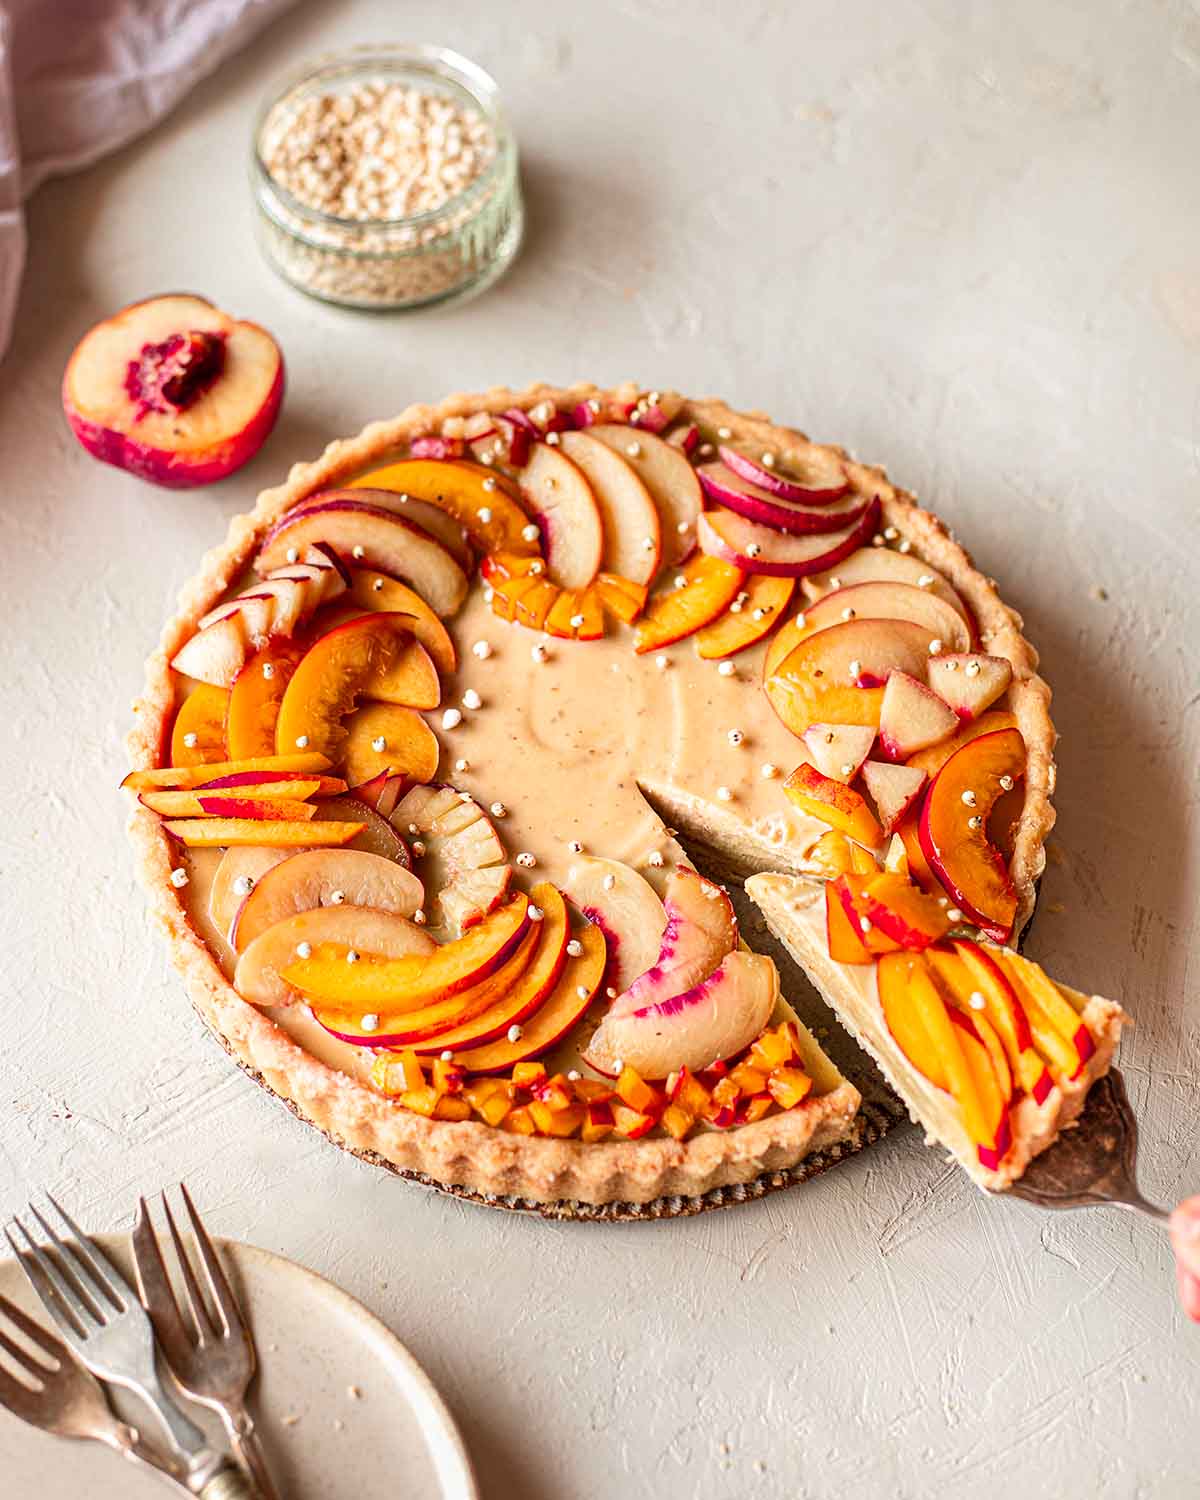 Vegan nectarine tart on plate with slice coming out.